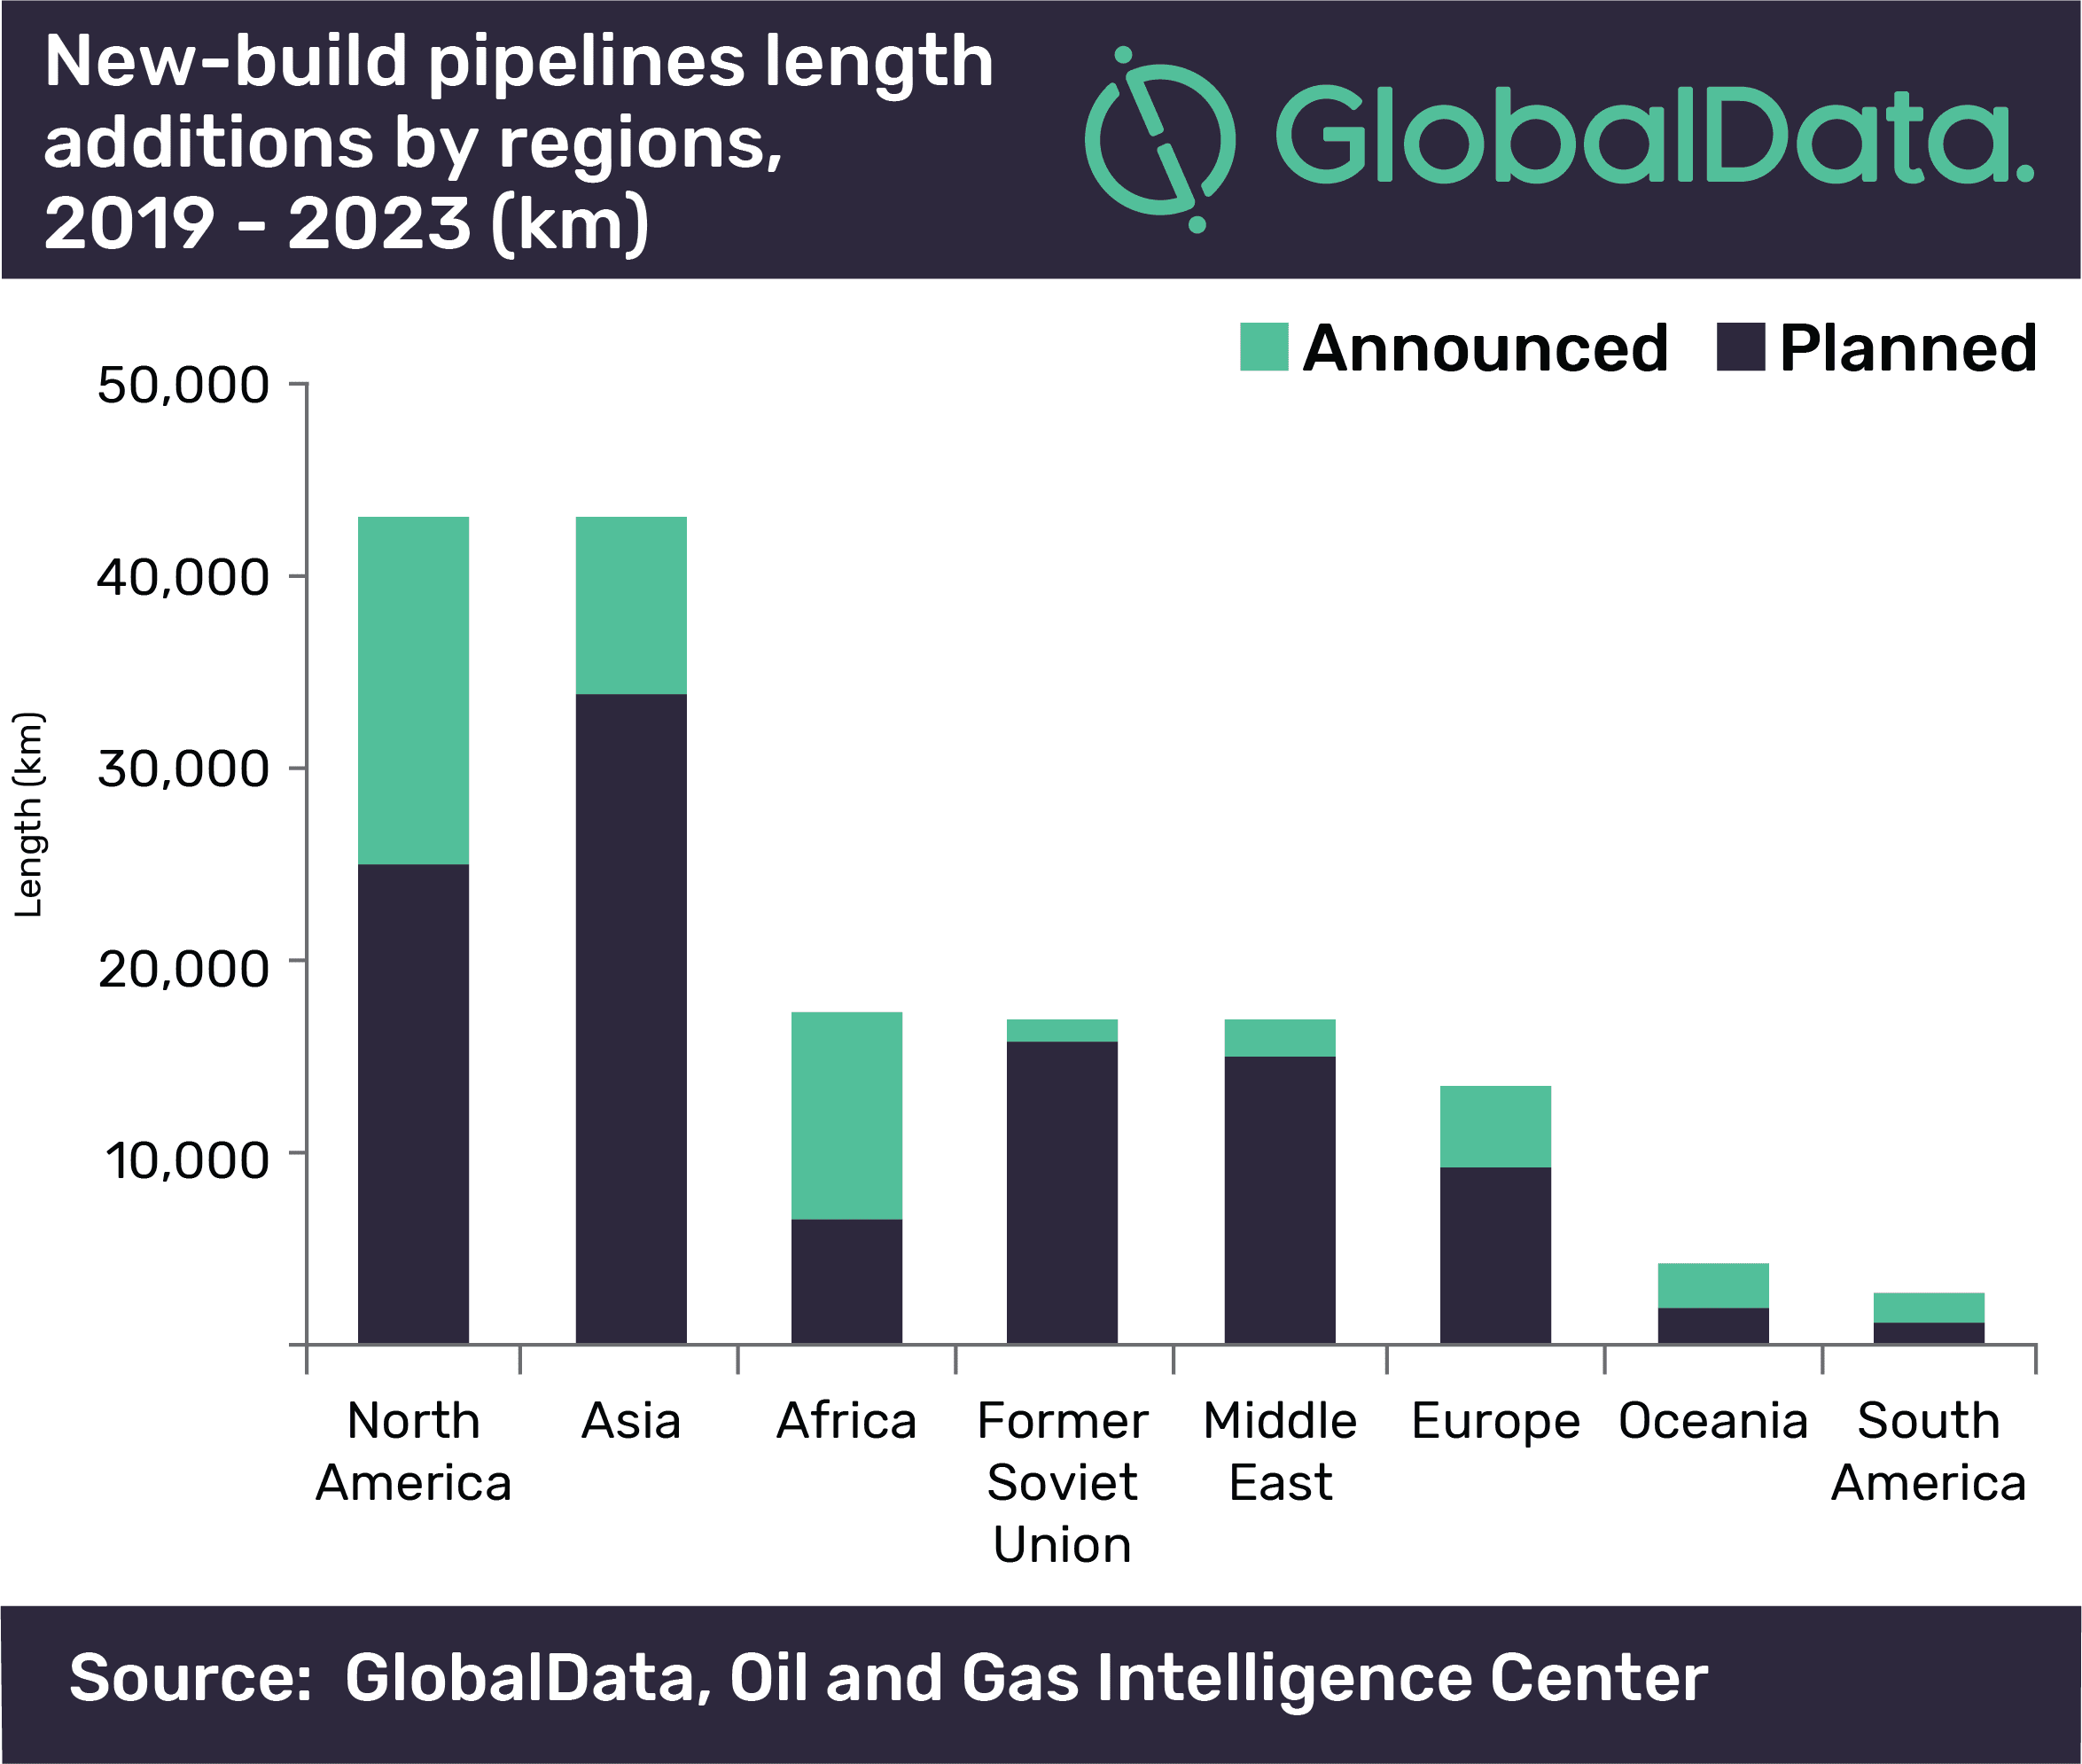 North America and Asia set to contribute 55% of global new-build trunk pipeline length additions by 2023